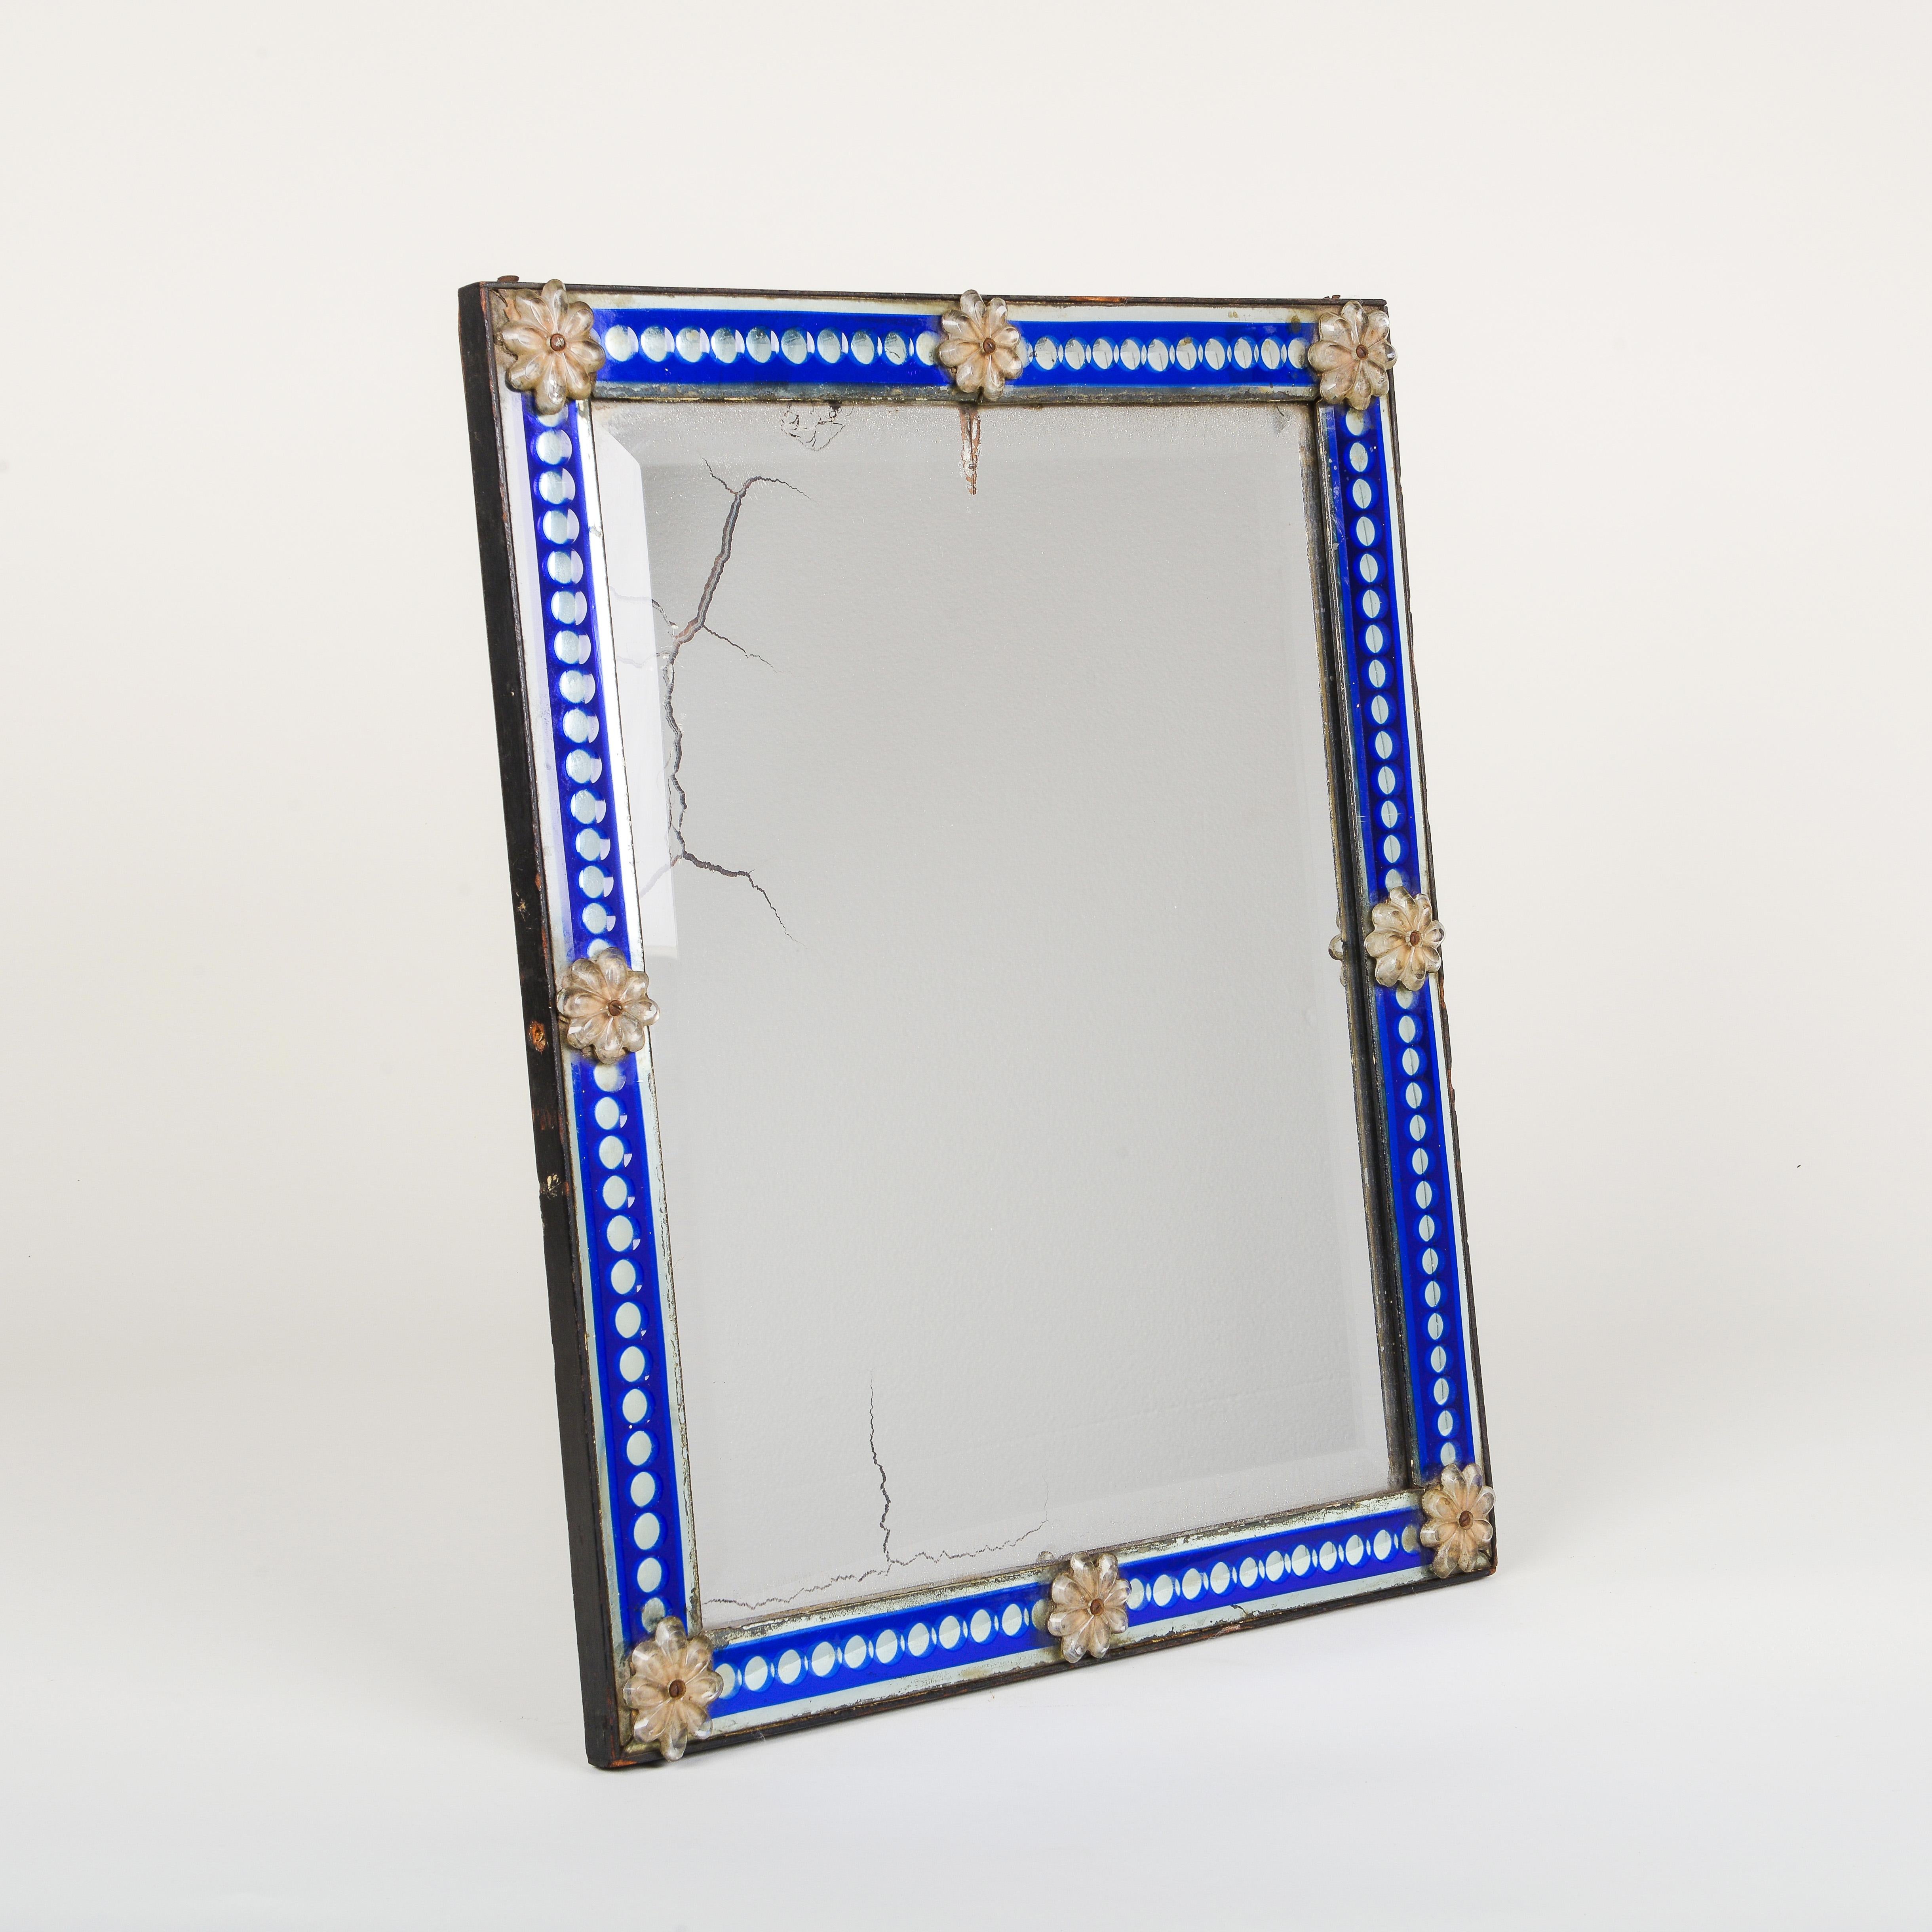 The rectangular beveled mirror plate bordered by clear dots on a blue ground surround, mounted with daisy form glass appliques. With easel form back.